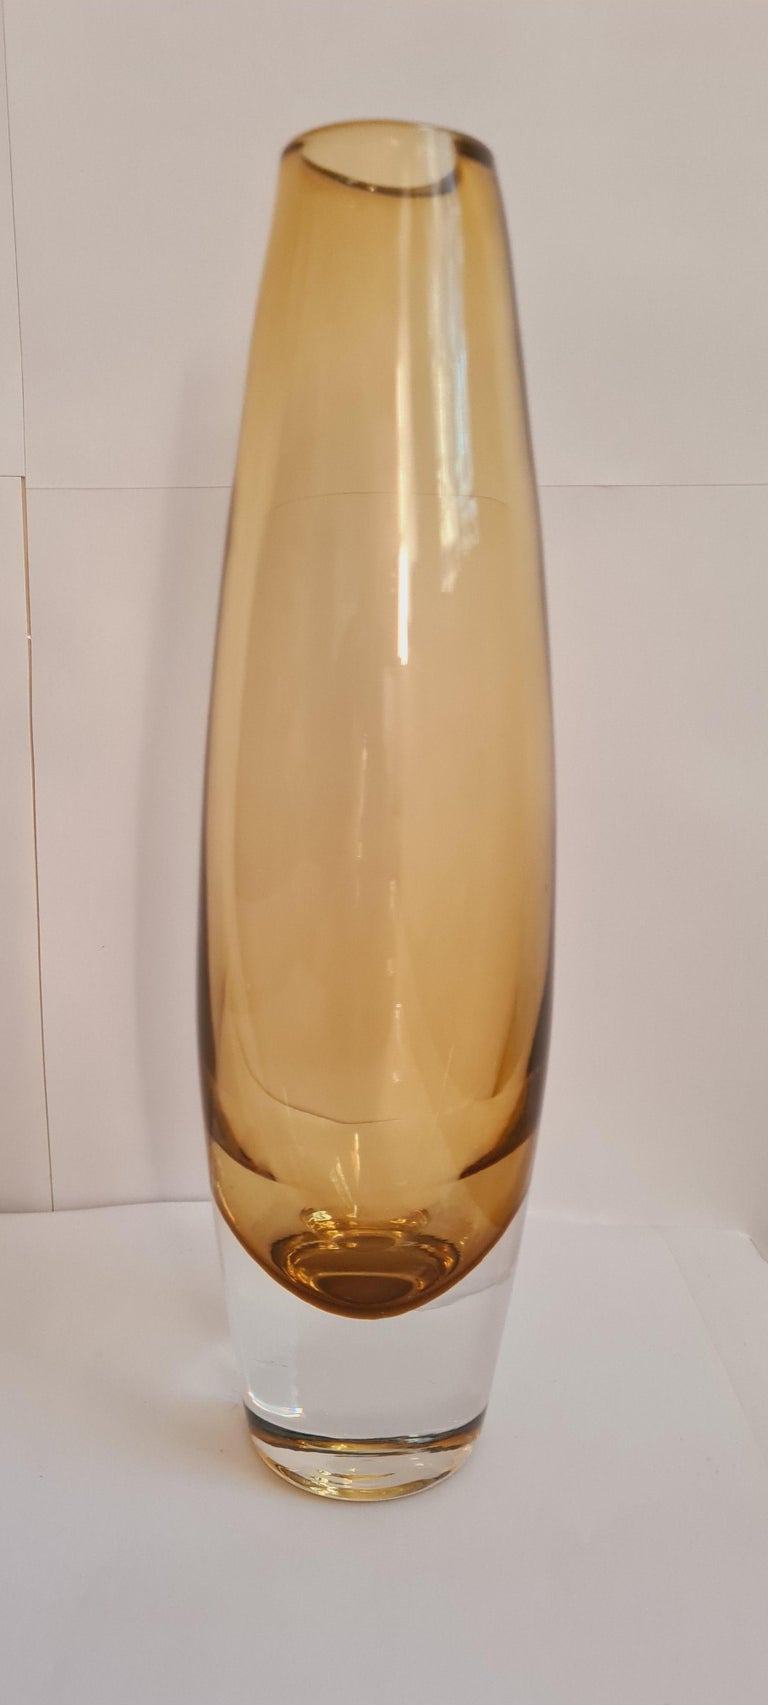 Beautiful Murano glass sommerso vase in amber and clear colour by Luciano Gaspari from Vetri Salviati.
In excellent condition.